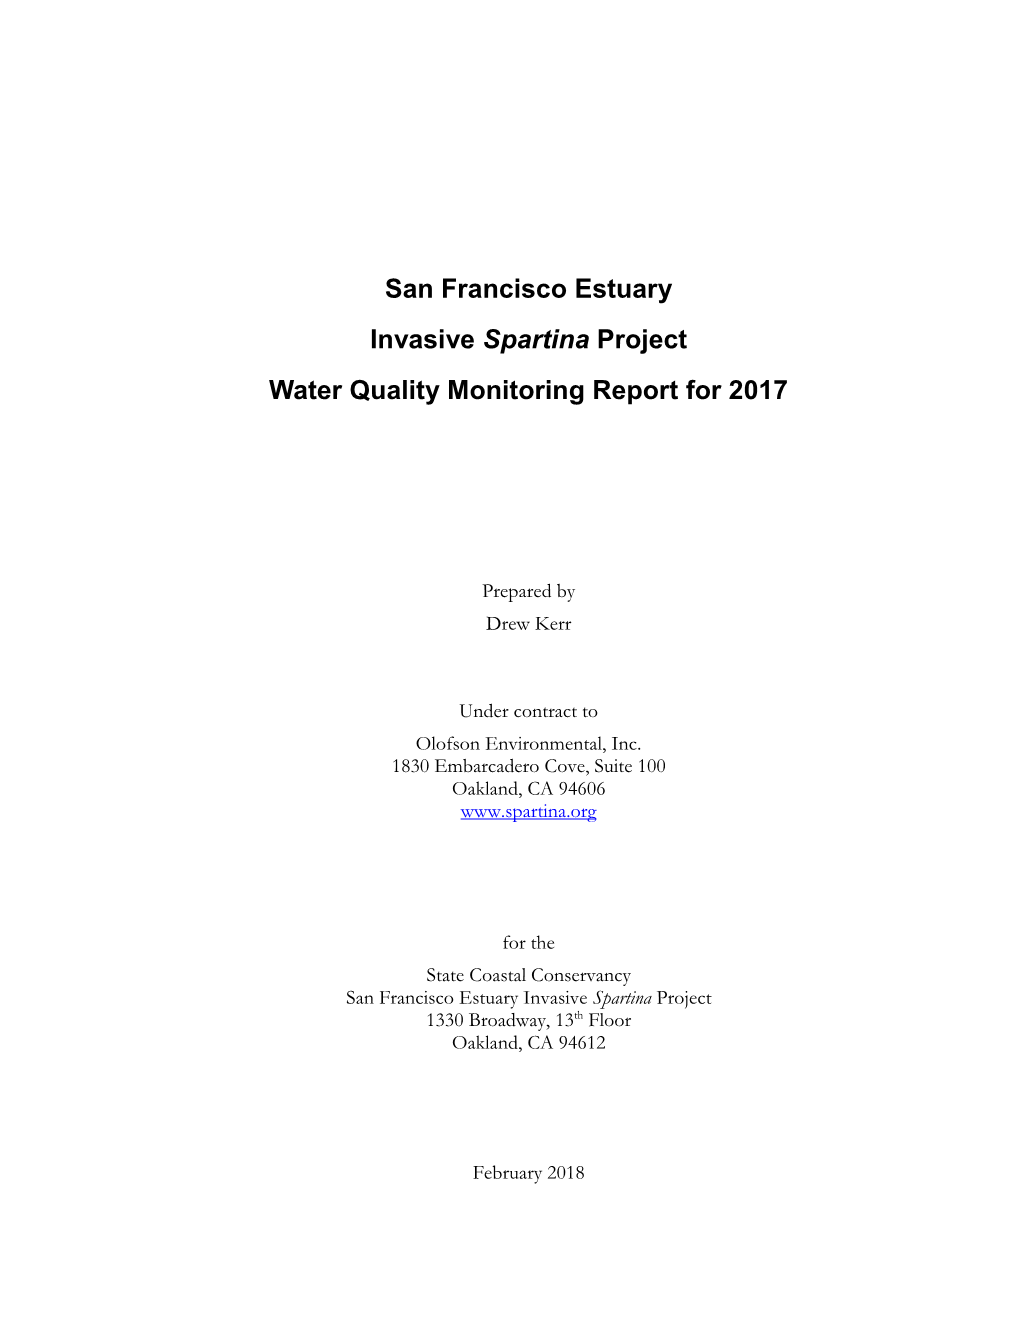 2017 Water Quality Monitoring Report